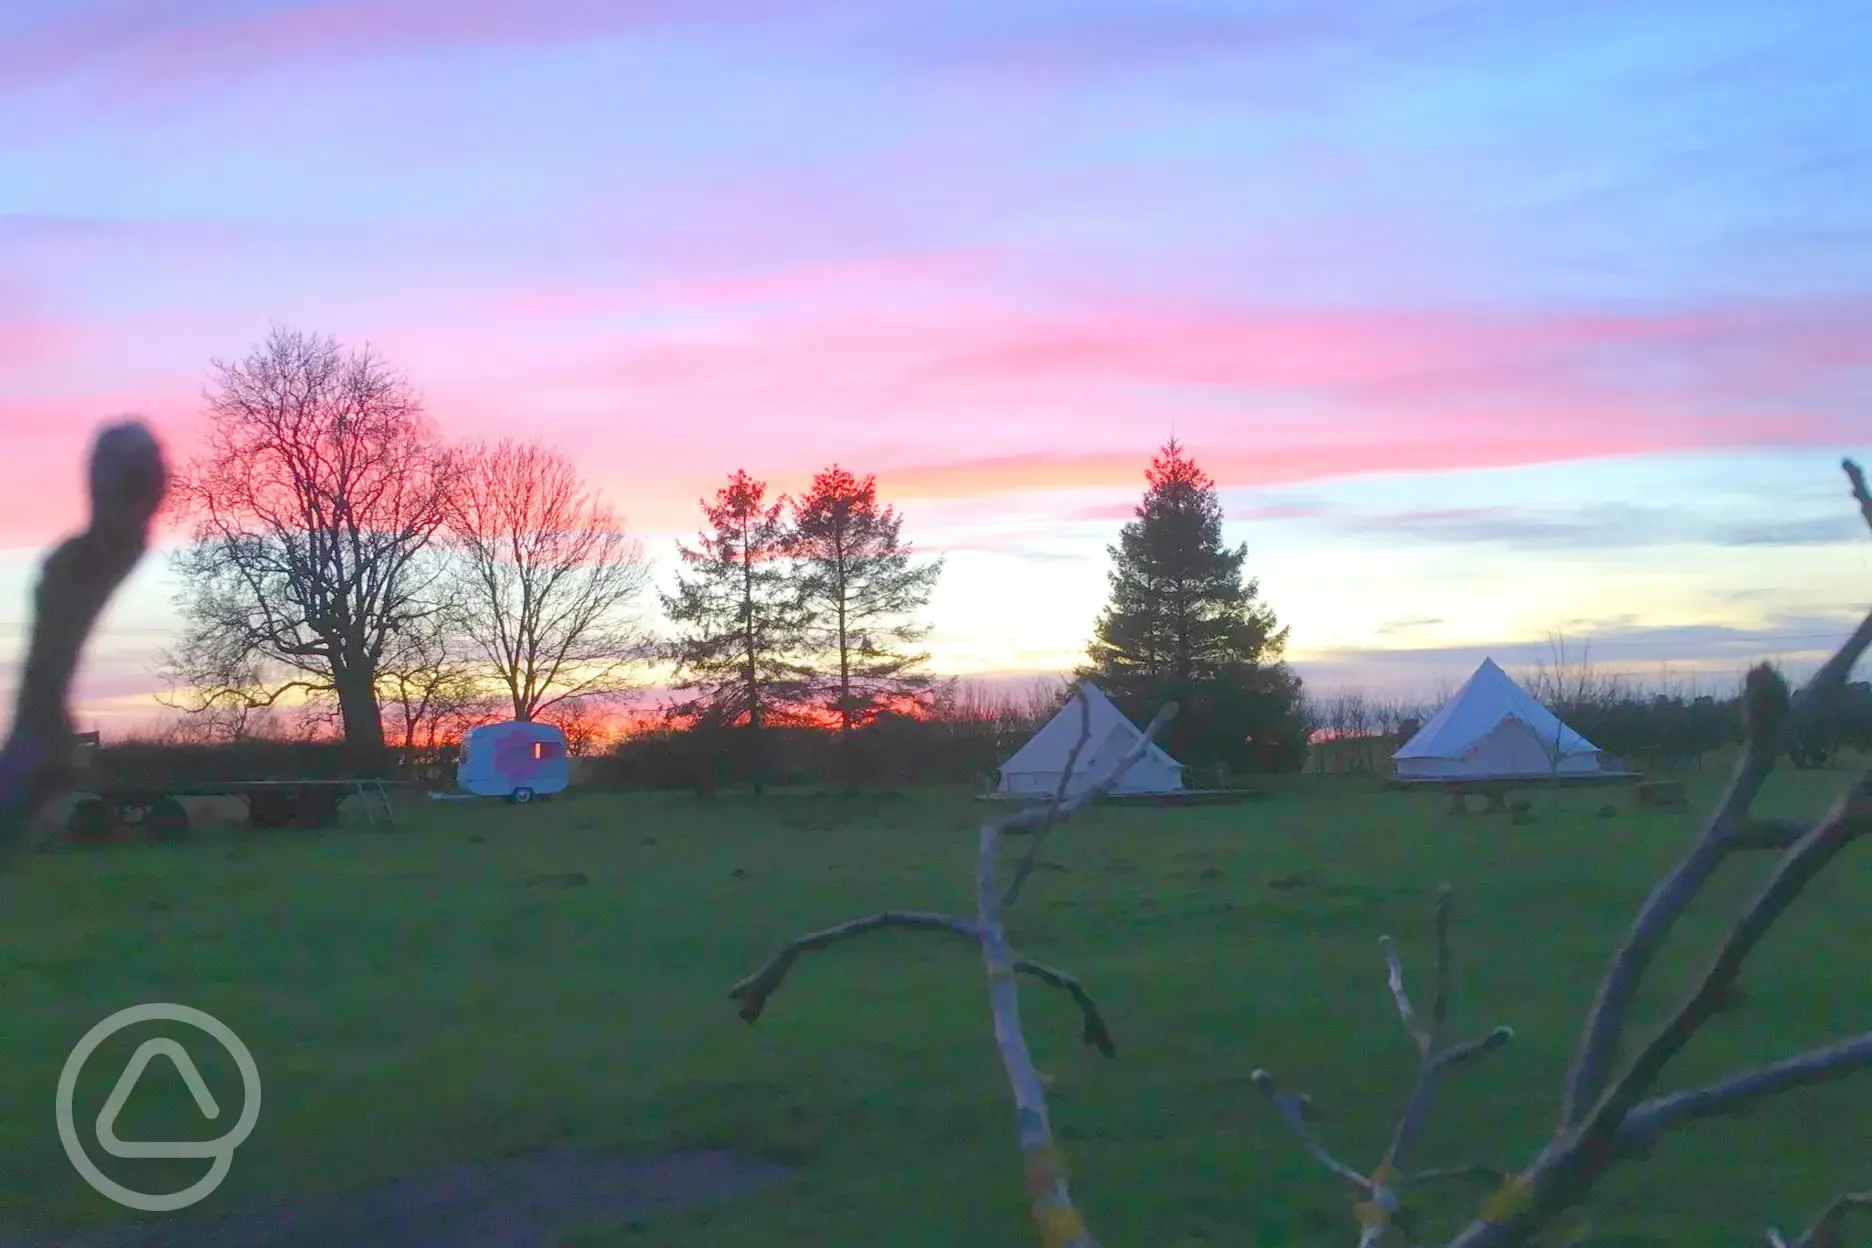 Glamping Thorpe at night in bell tents